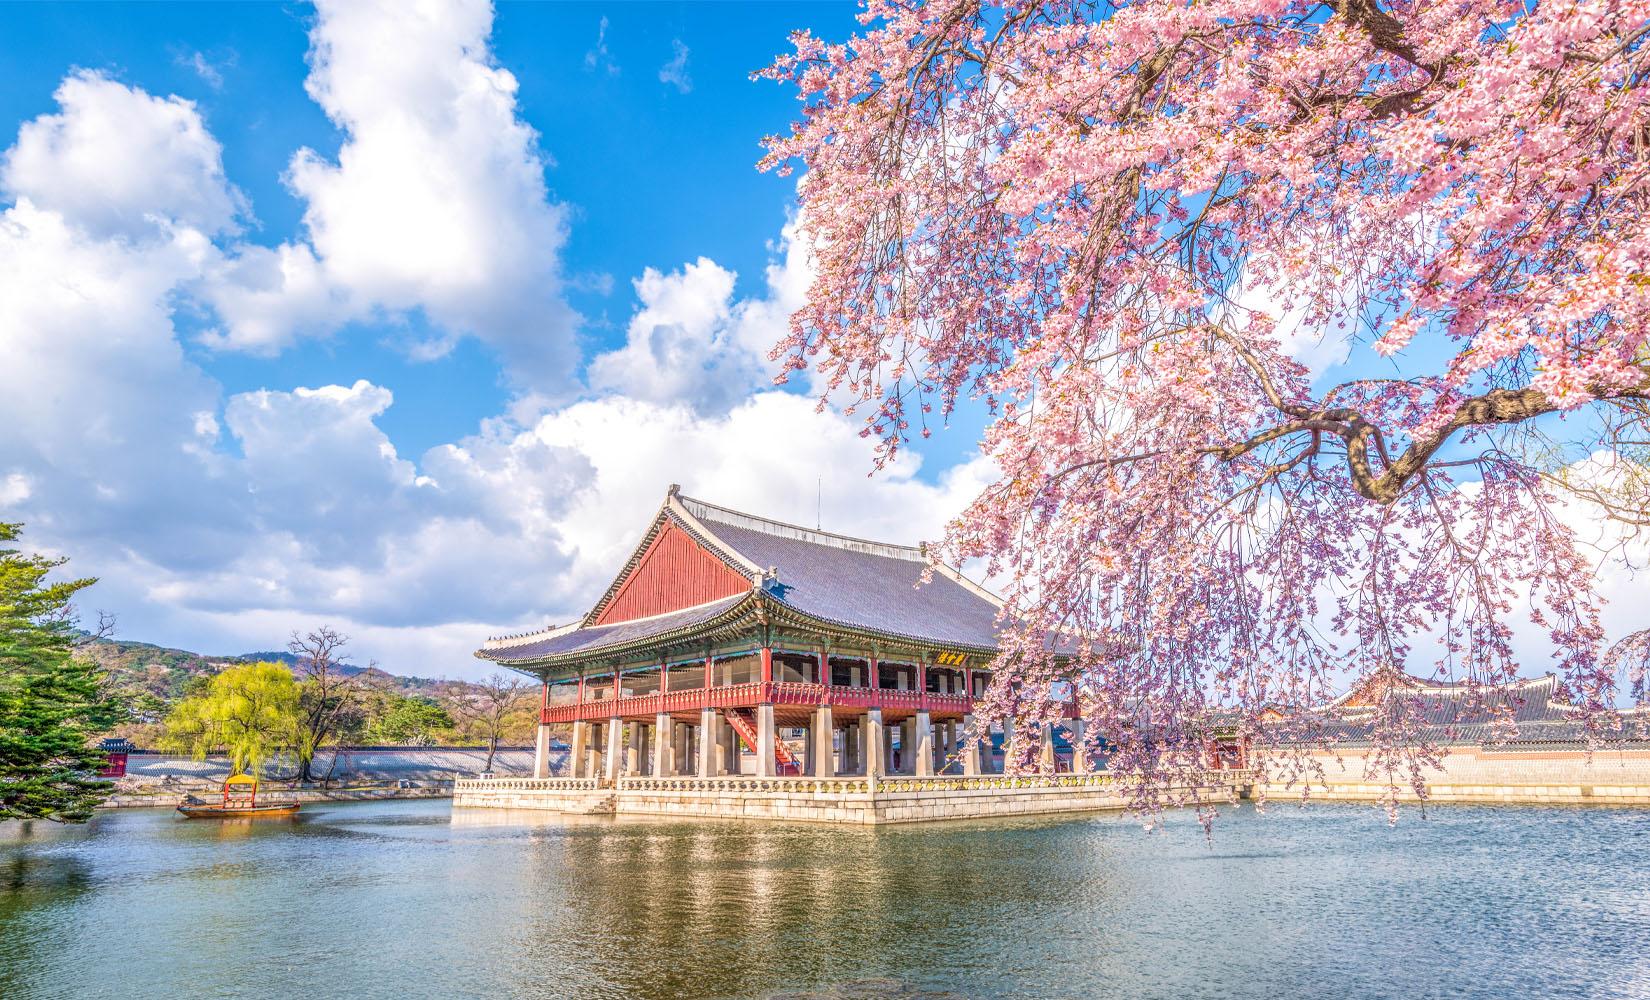 Creatrip: Everything You Need to Know About Gyeongbokgung! - Seoul/Korea  (Travel Guide)